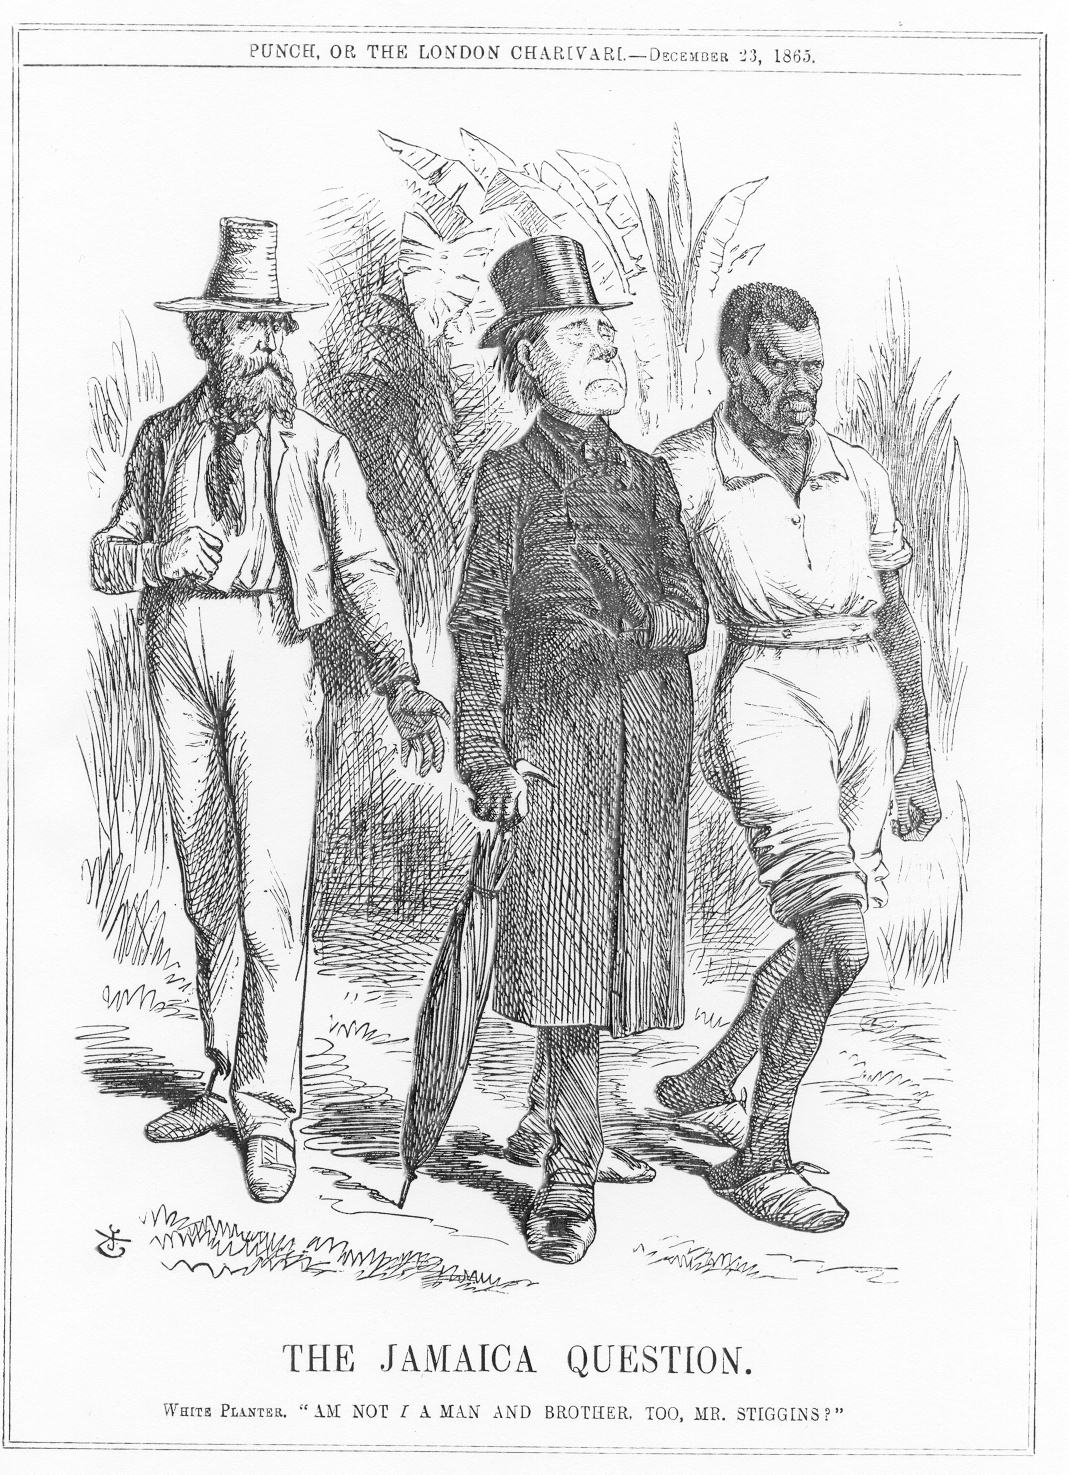 Figure 2. Punch.—December 23, 1865. The Jamaica Question. White Planter. "Am Not I a Man and a Brother, Too, Mr. Stiggins?"